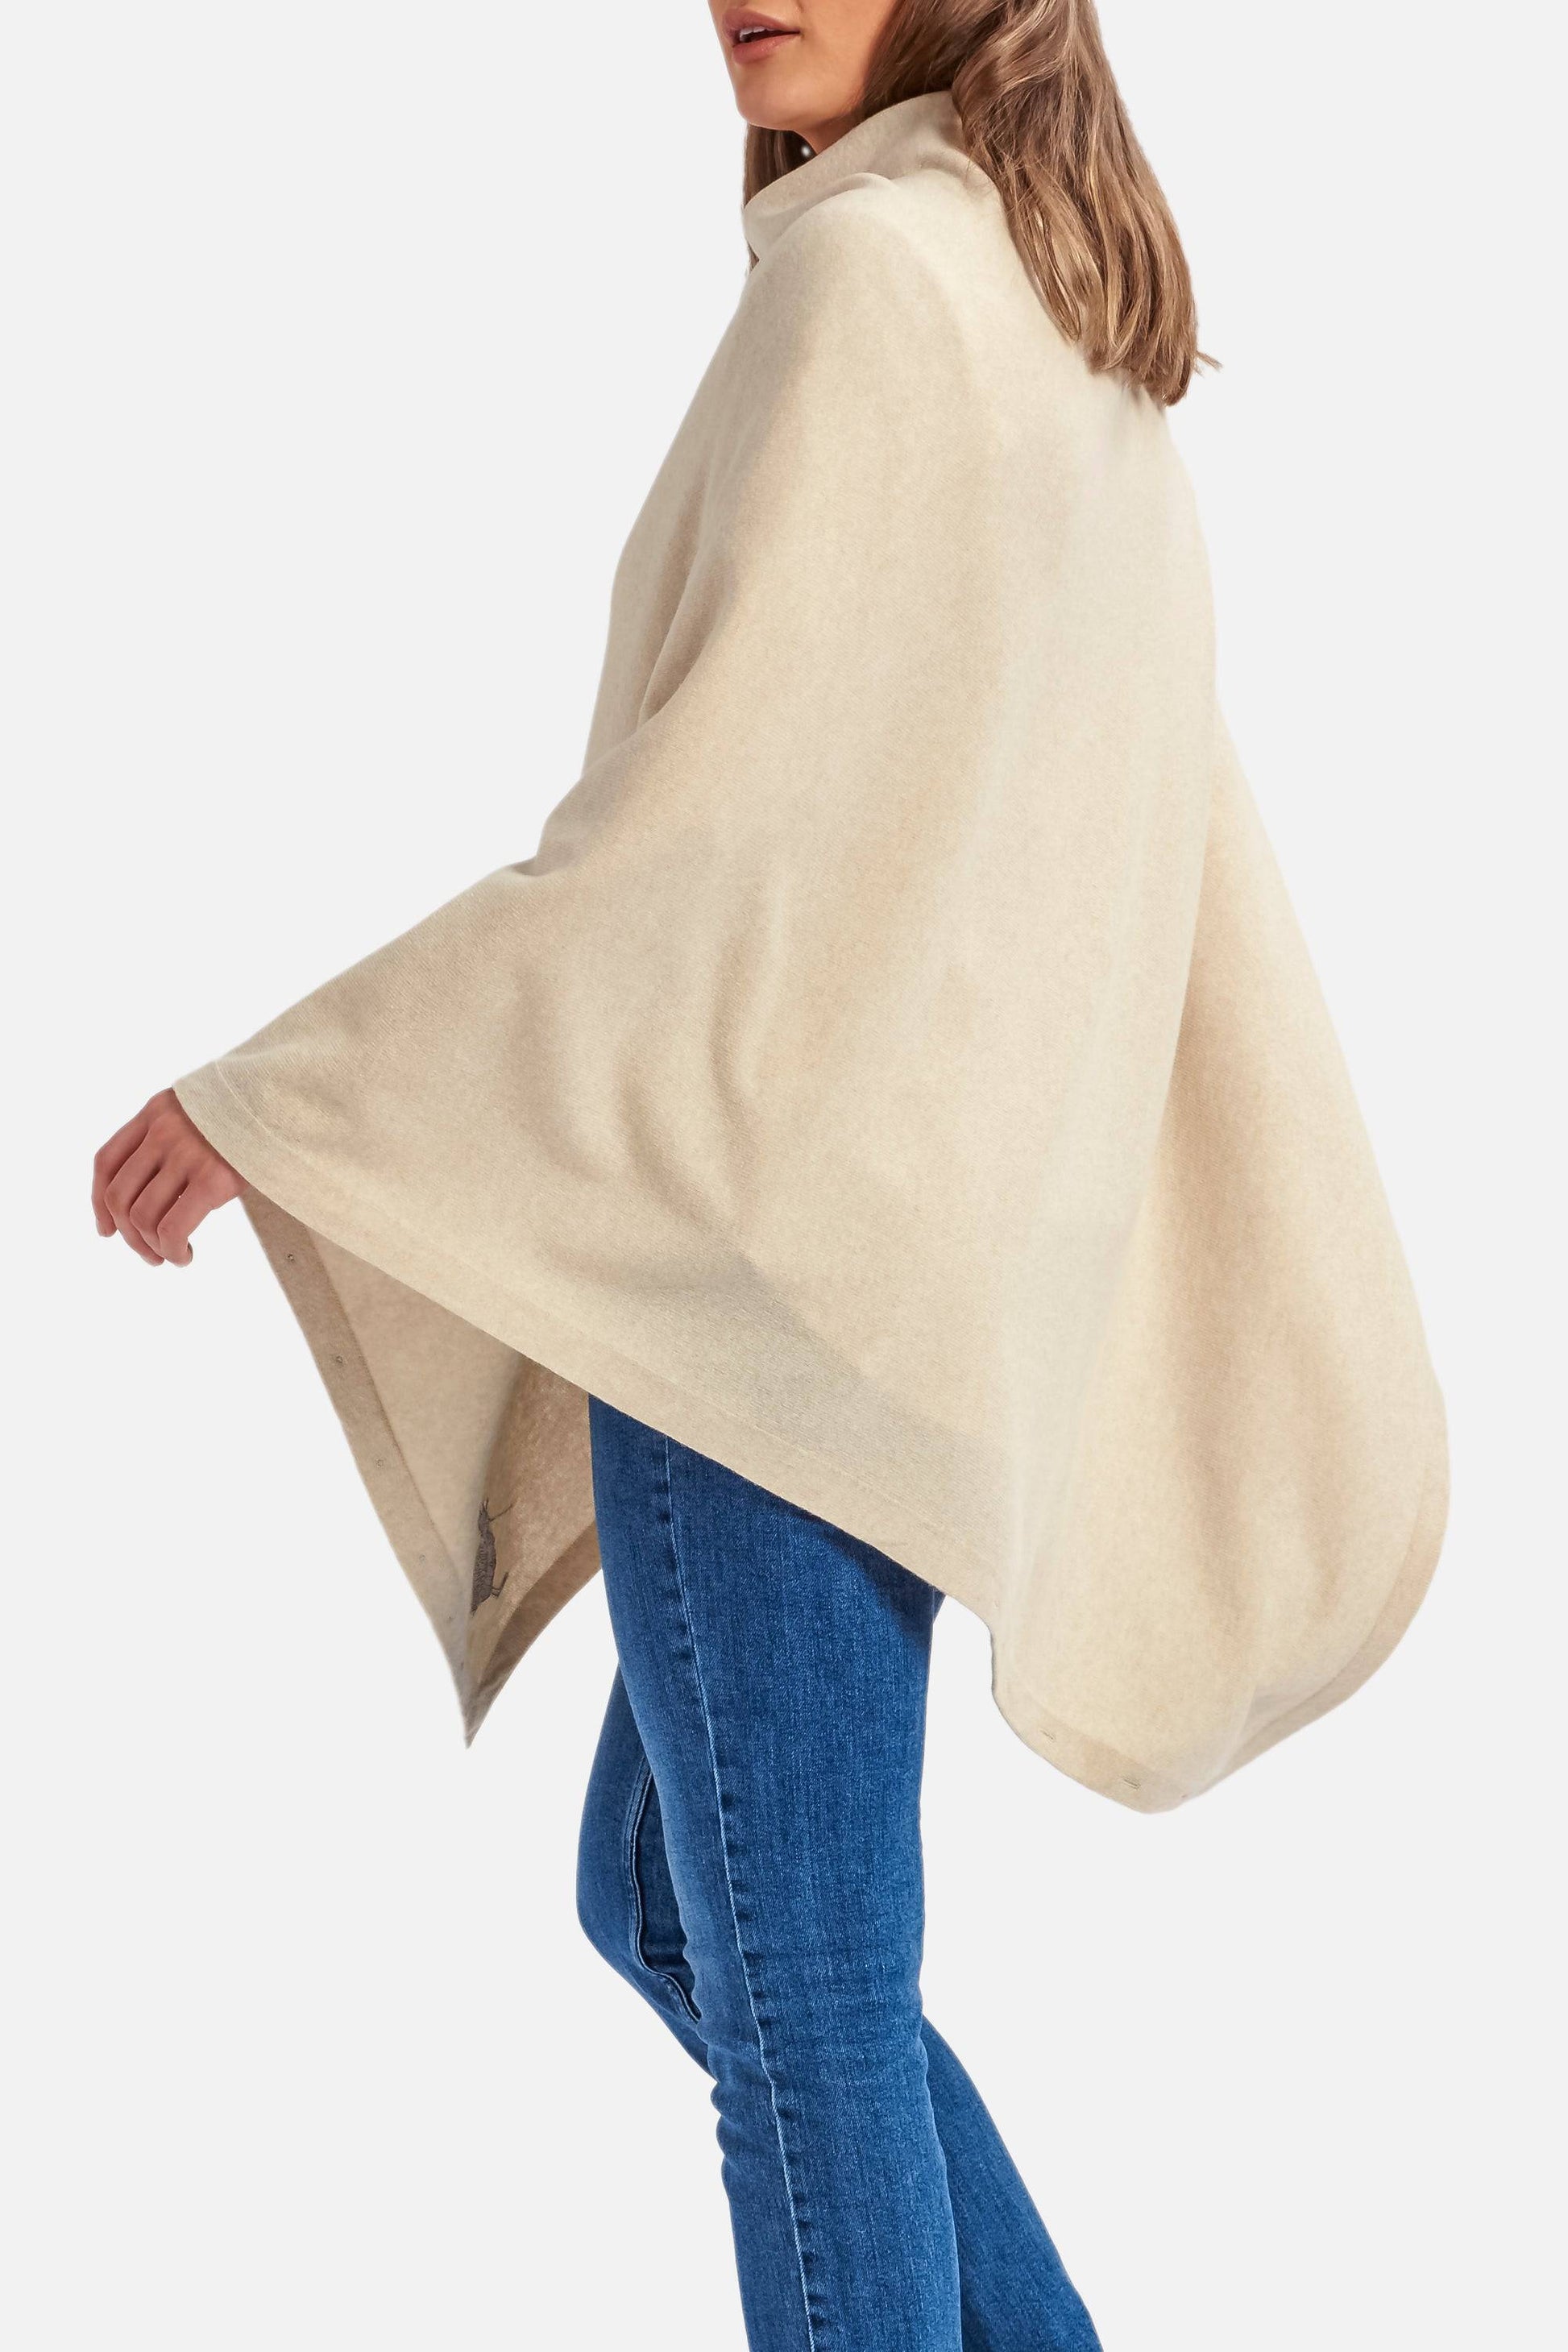 Cashmere Button Long Poncho in Natural by Woodcock & Cavendish for sale - Woodcock and Cavendish